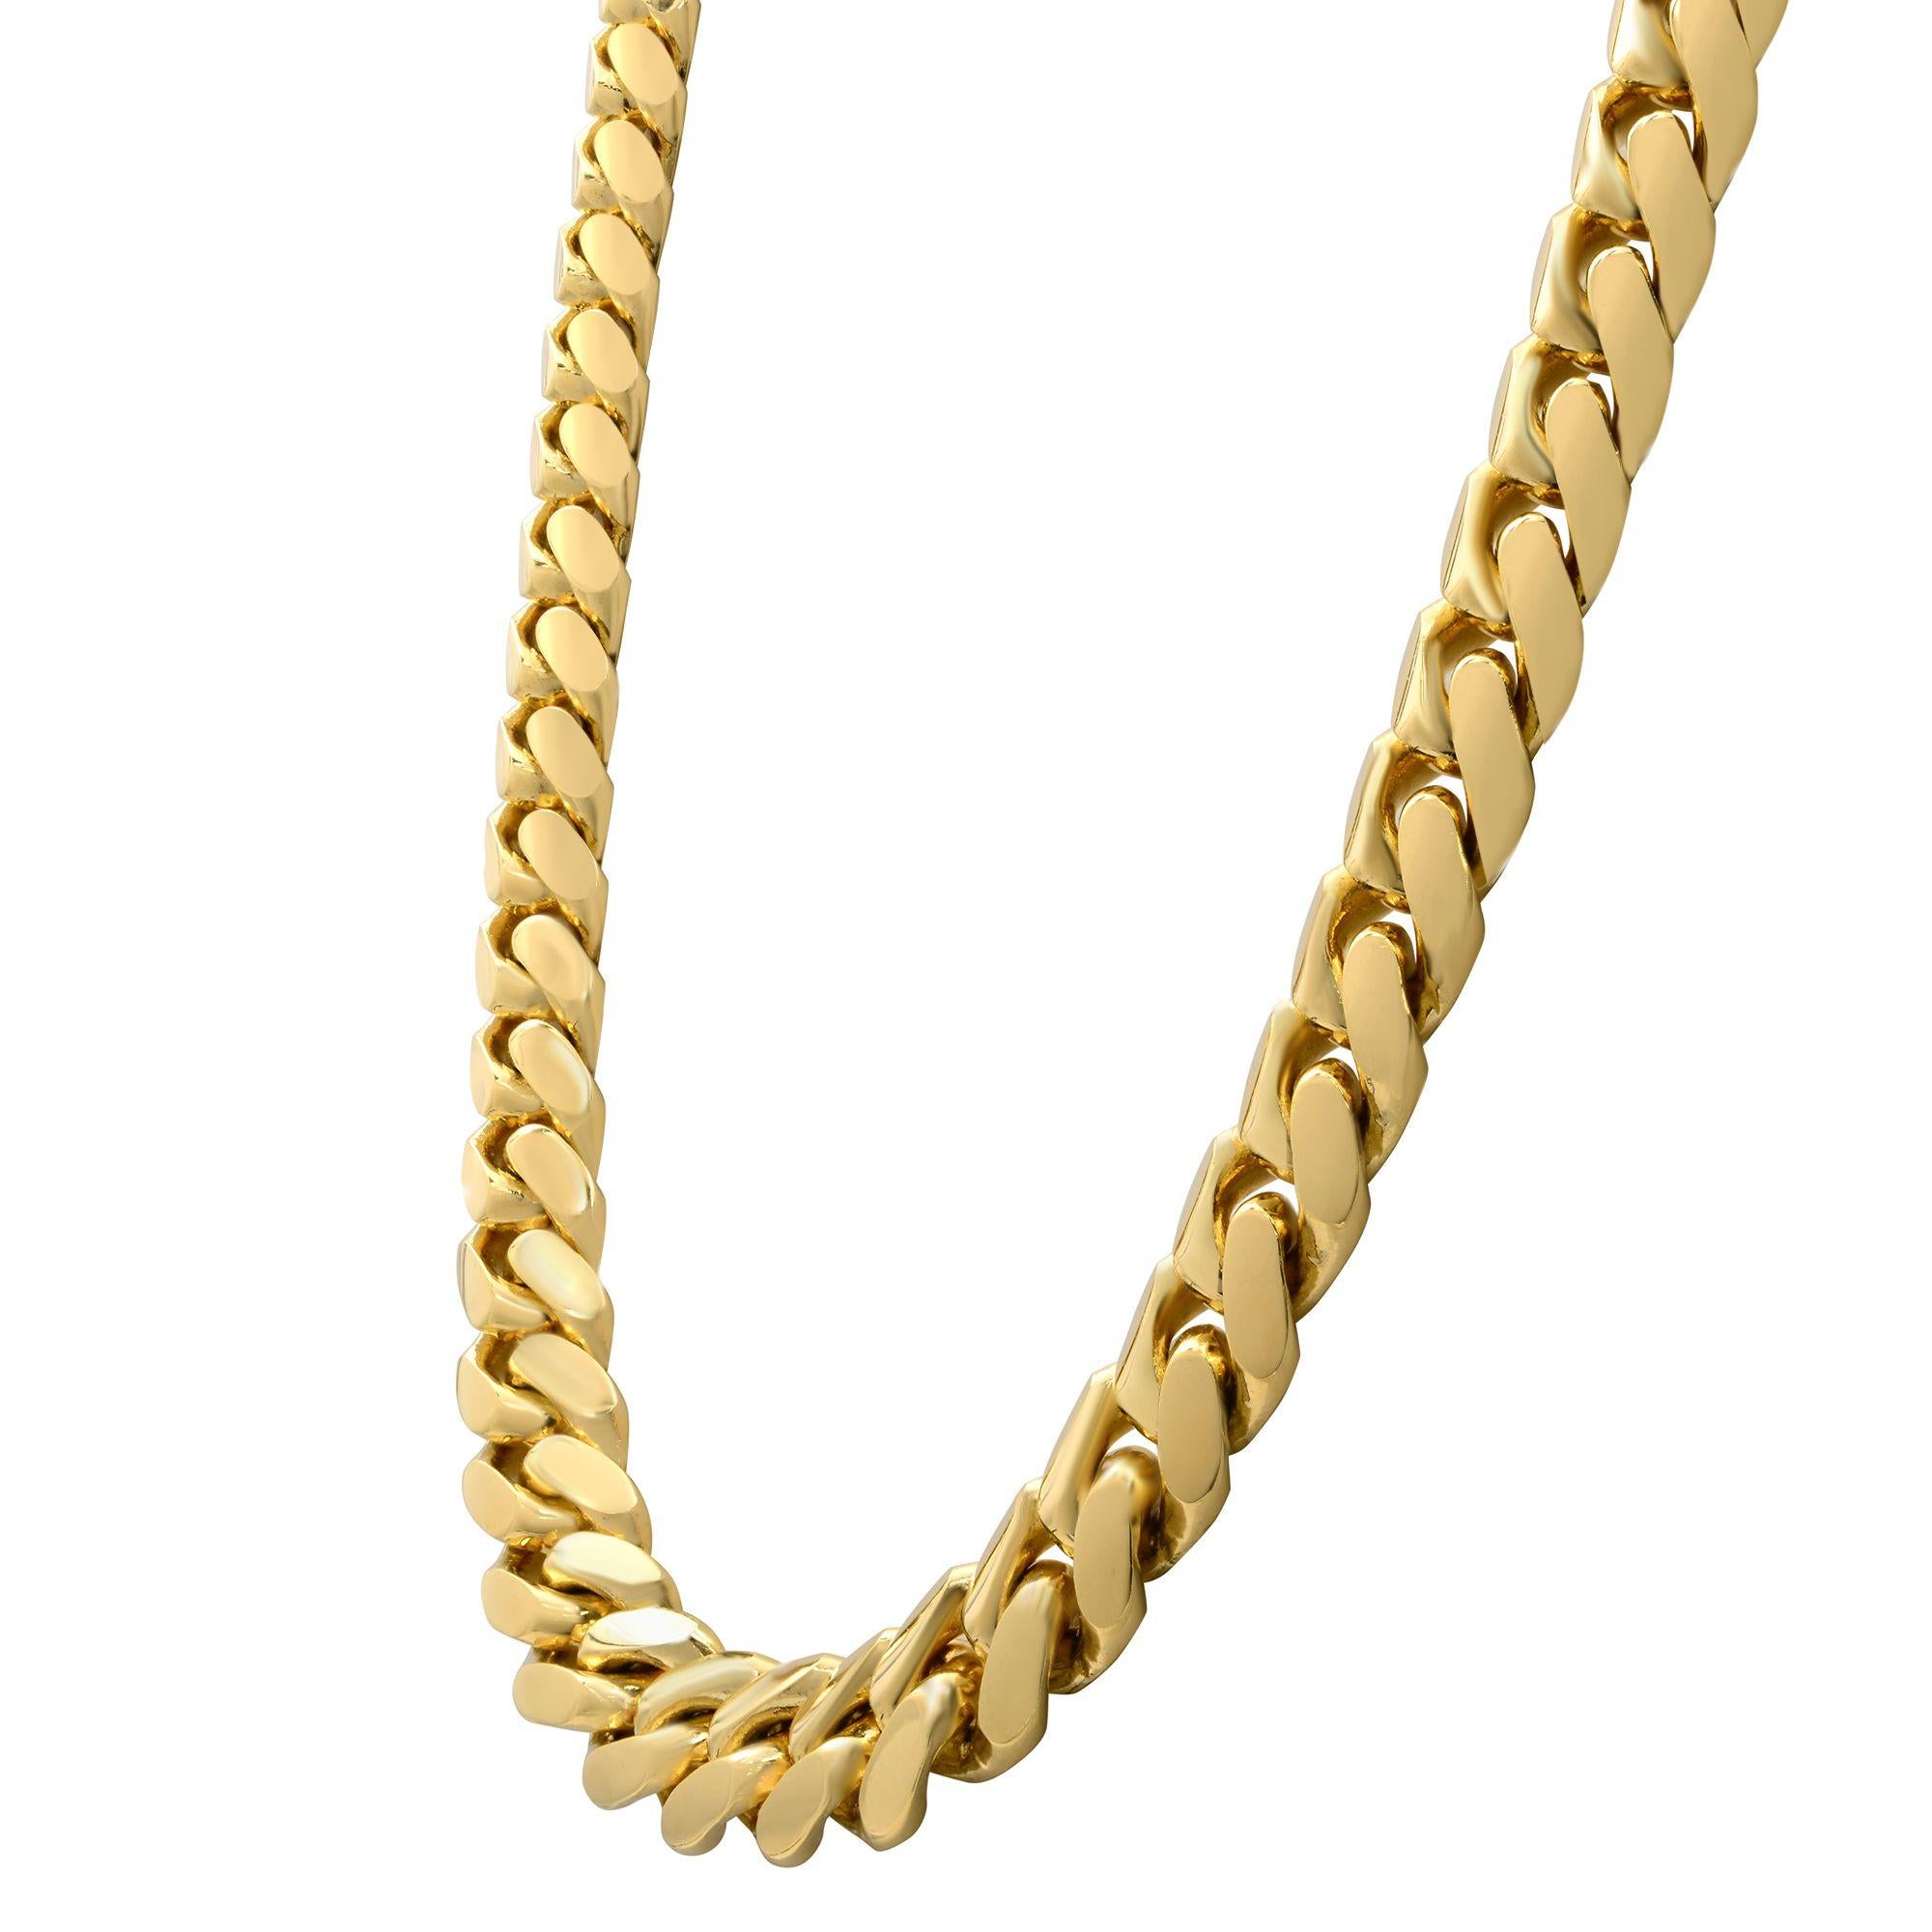 This Miami Cuban link chain is handcrafted in highly gleaming 14K yellow gold. Solid gold. The chain measures 24 inches in length and 9.5 mm in width. Weighing approximately 173.00 grams. This chain securely locks with a durable box clasp with two